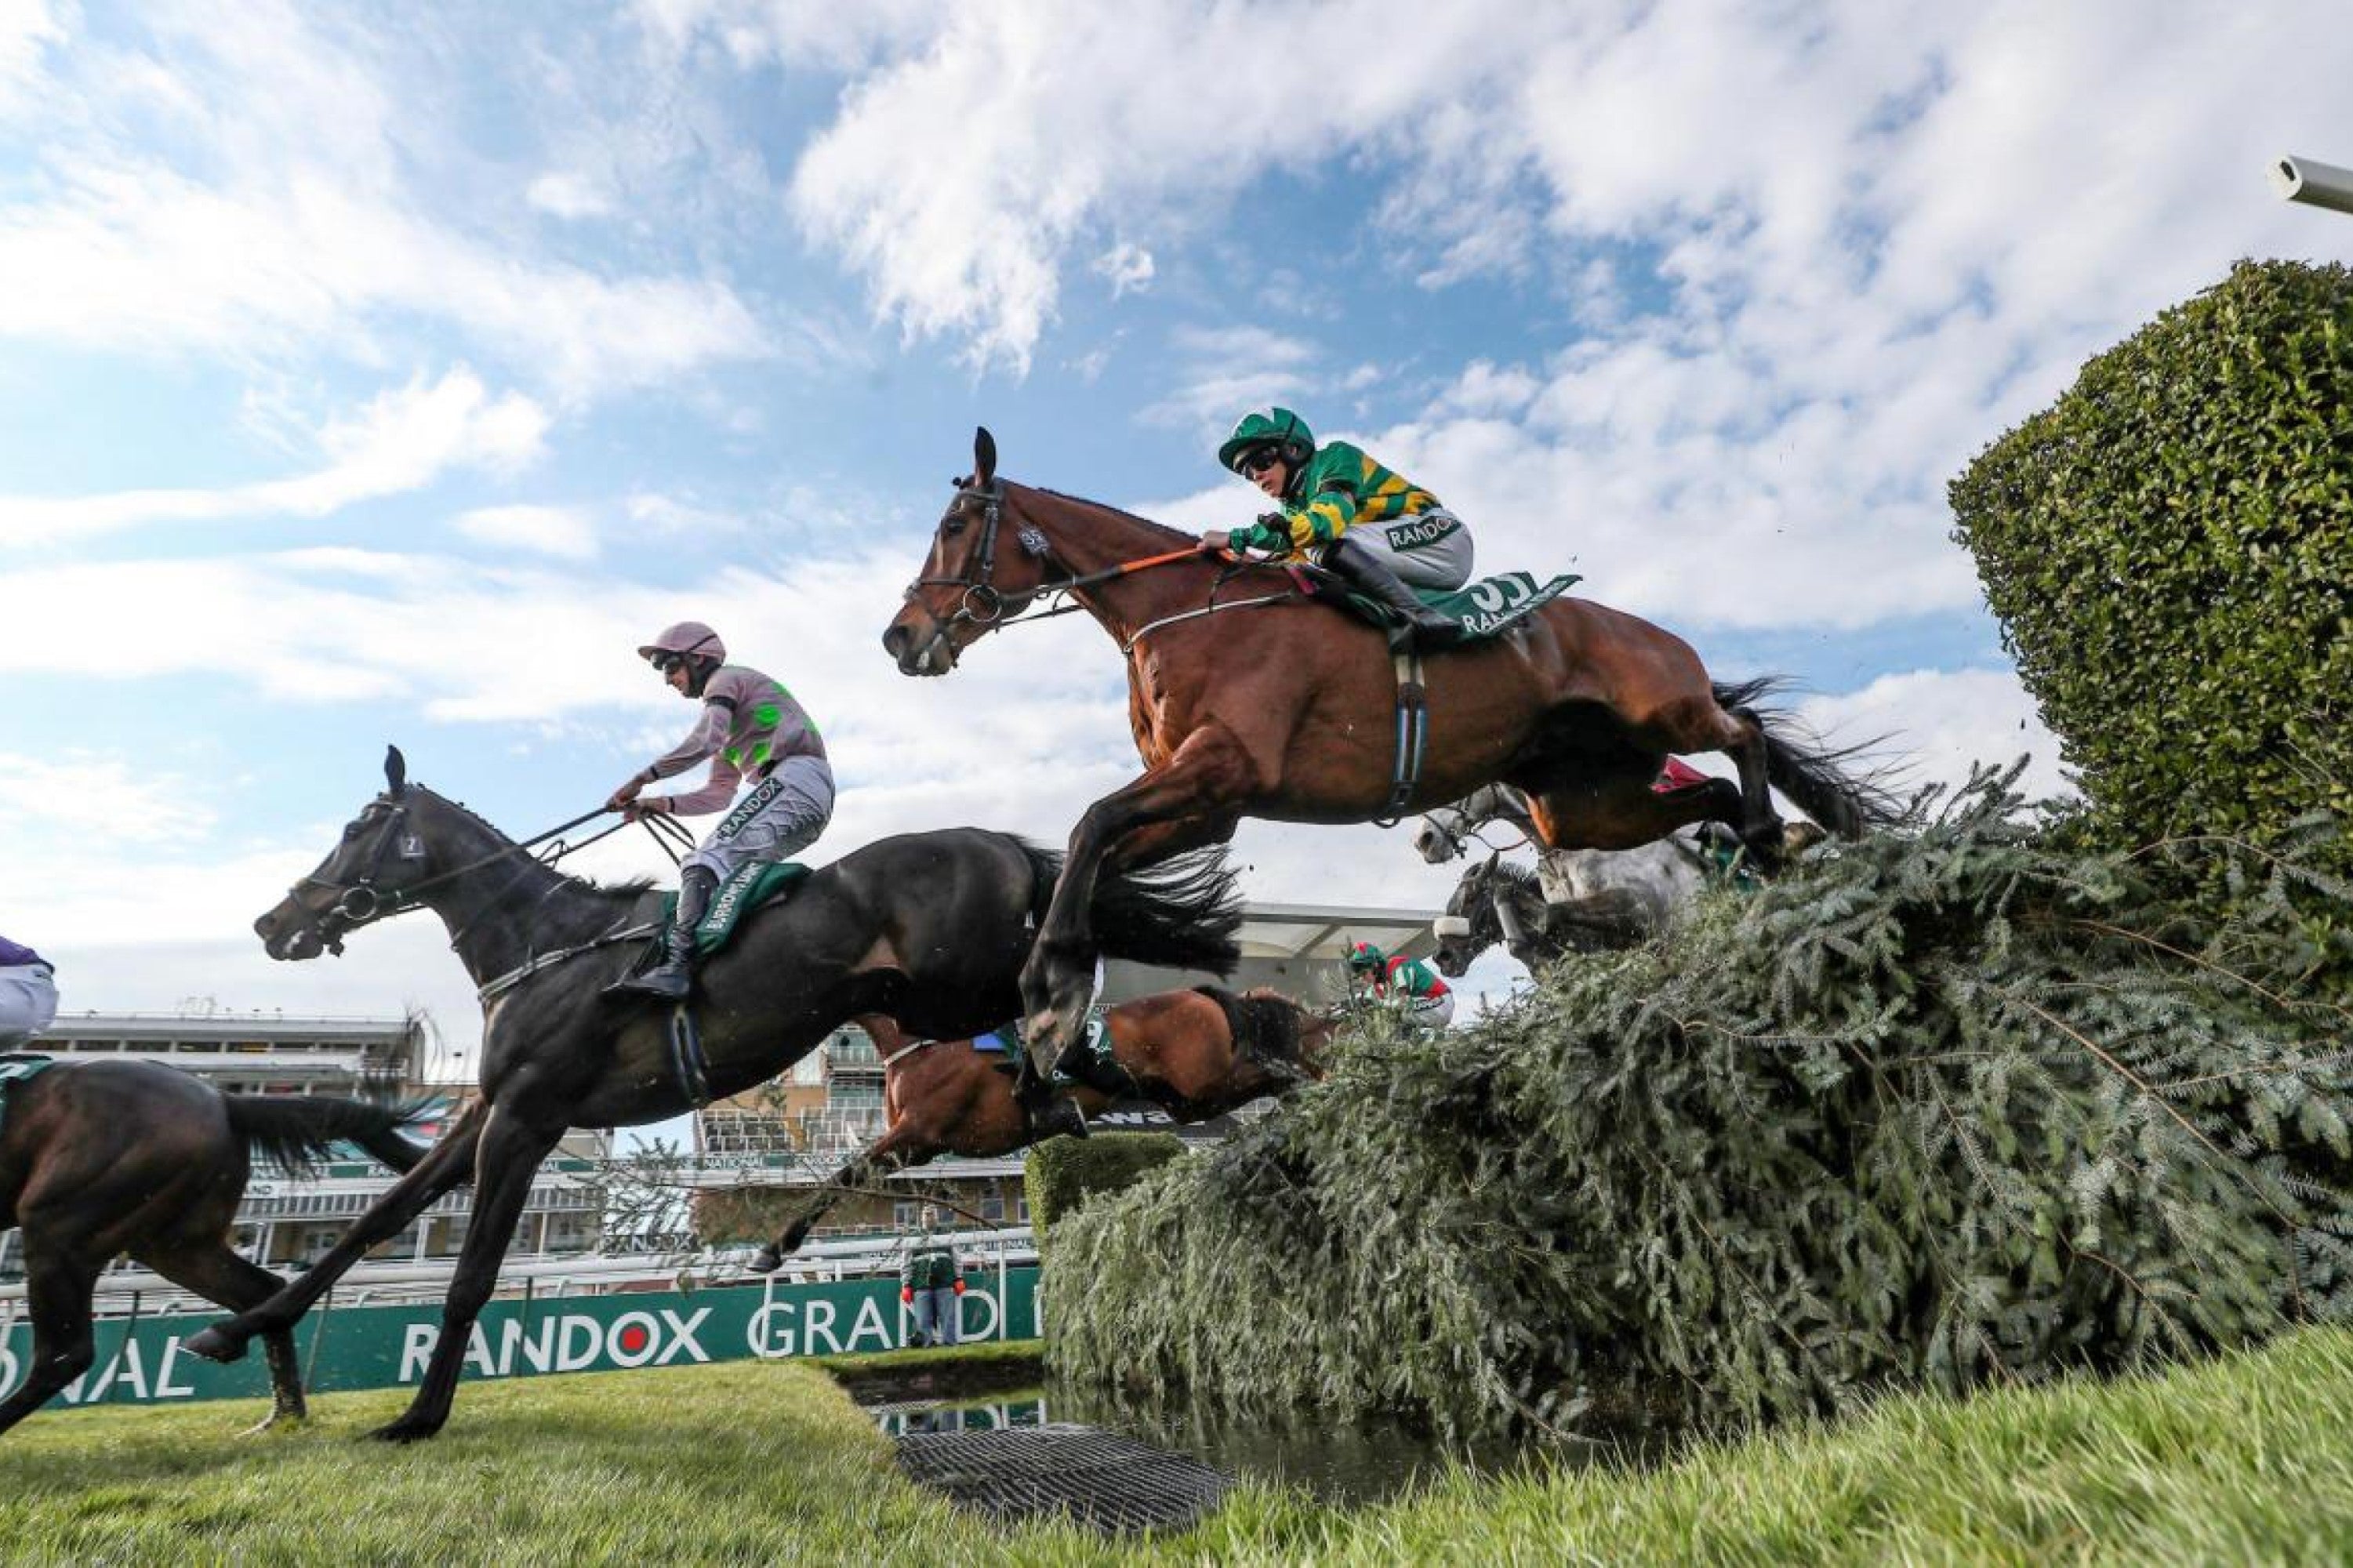 The 2022 Grand National will be at Aintree on 9th April